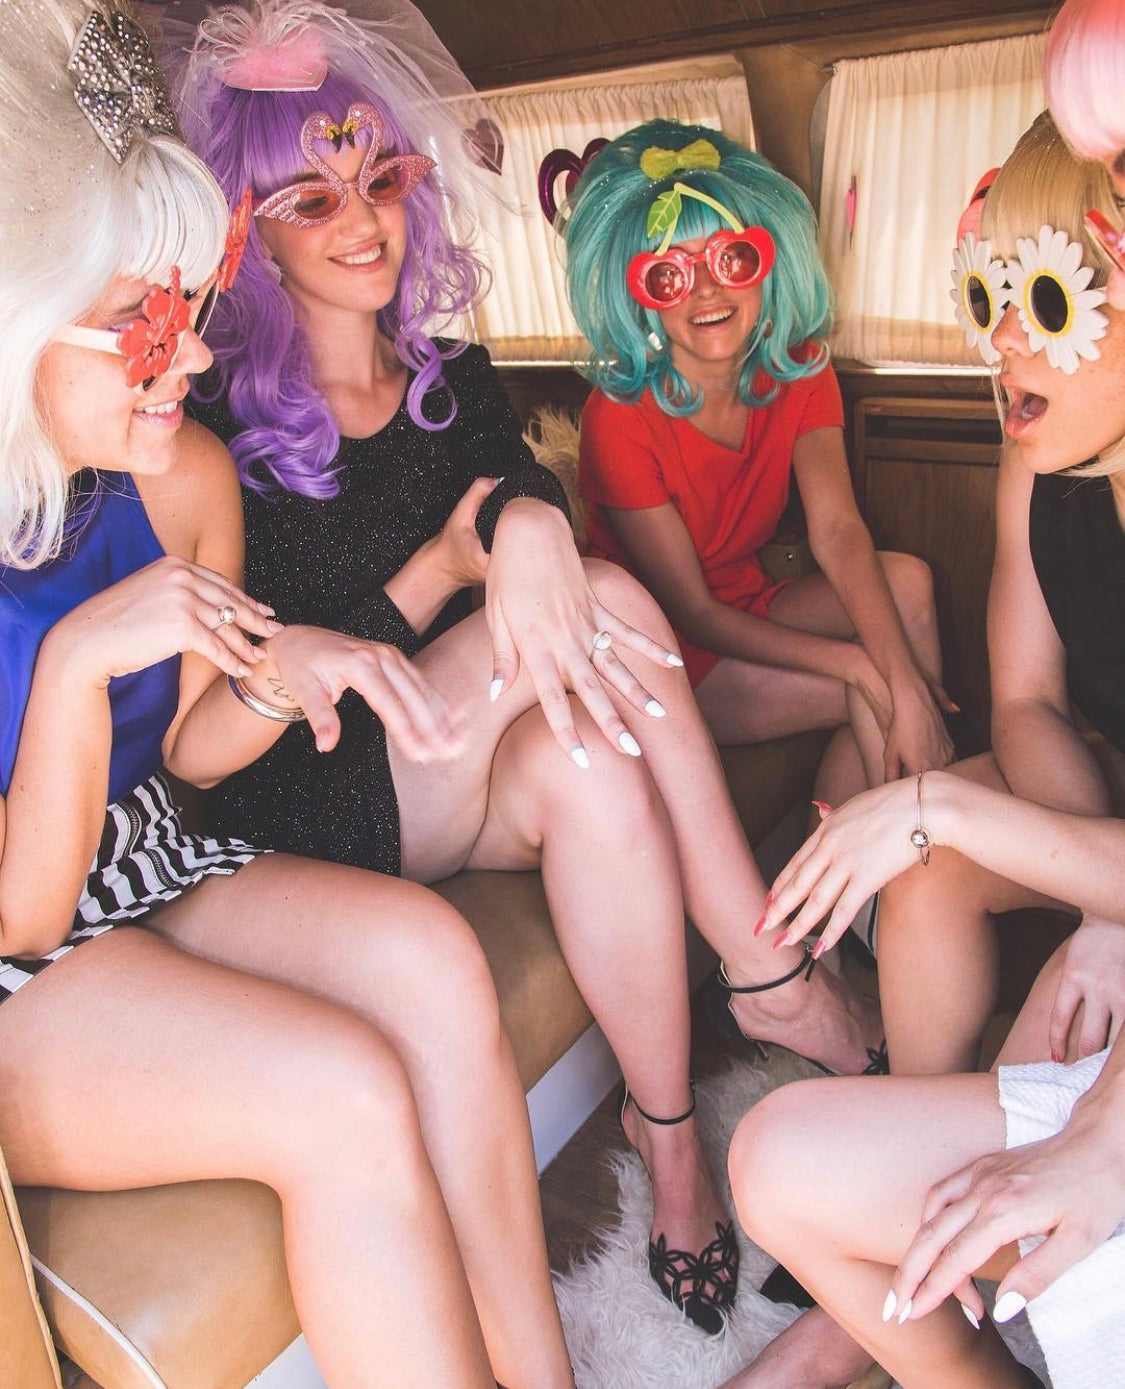 55 Ideas for the Unconventional Bachelorette Party